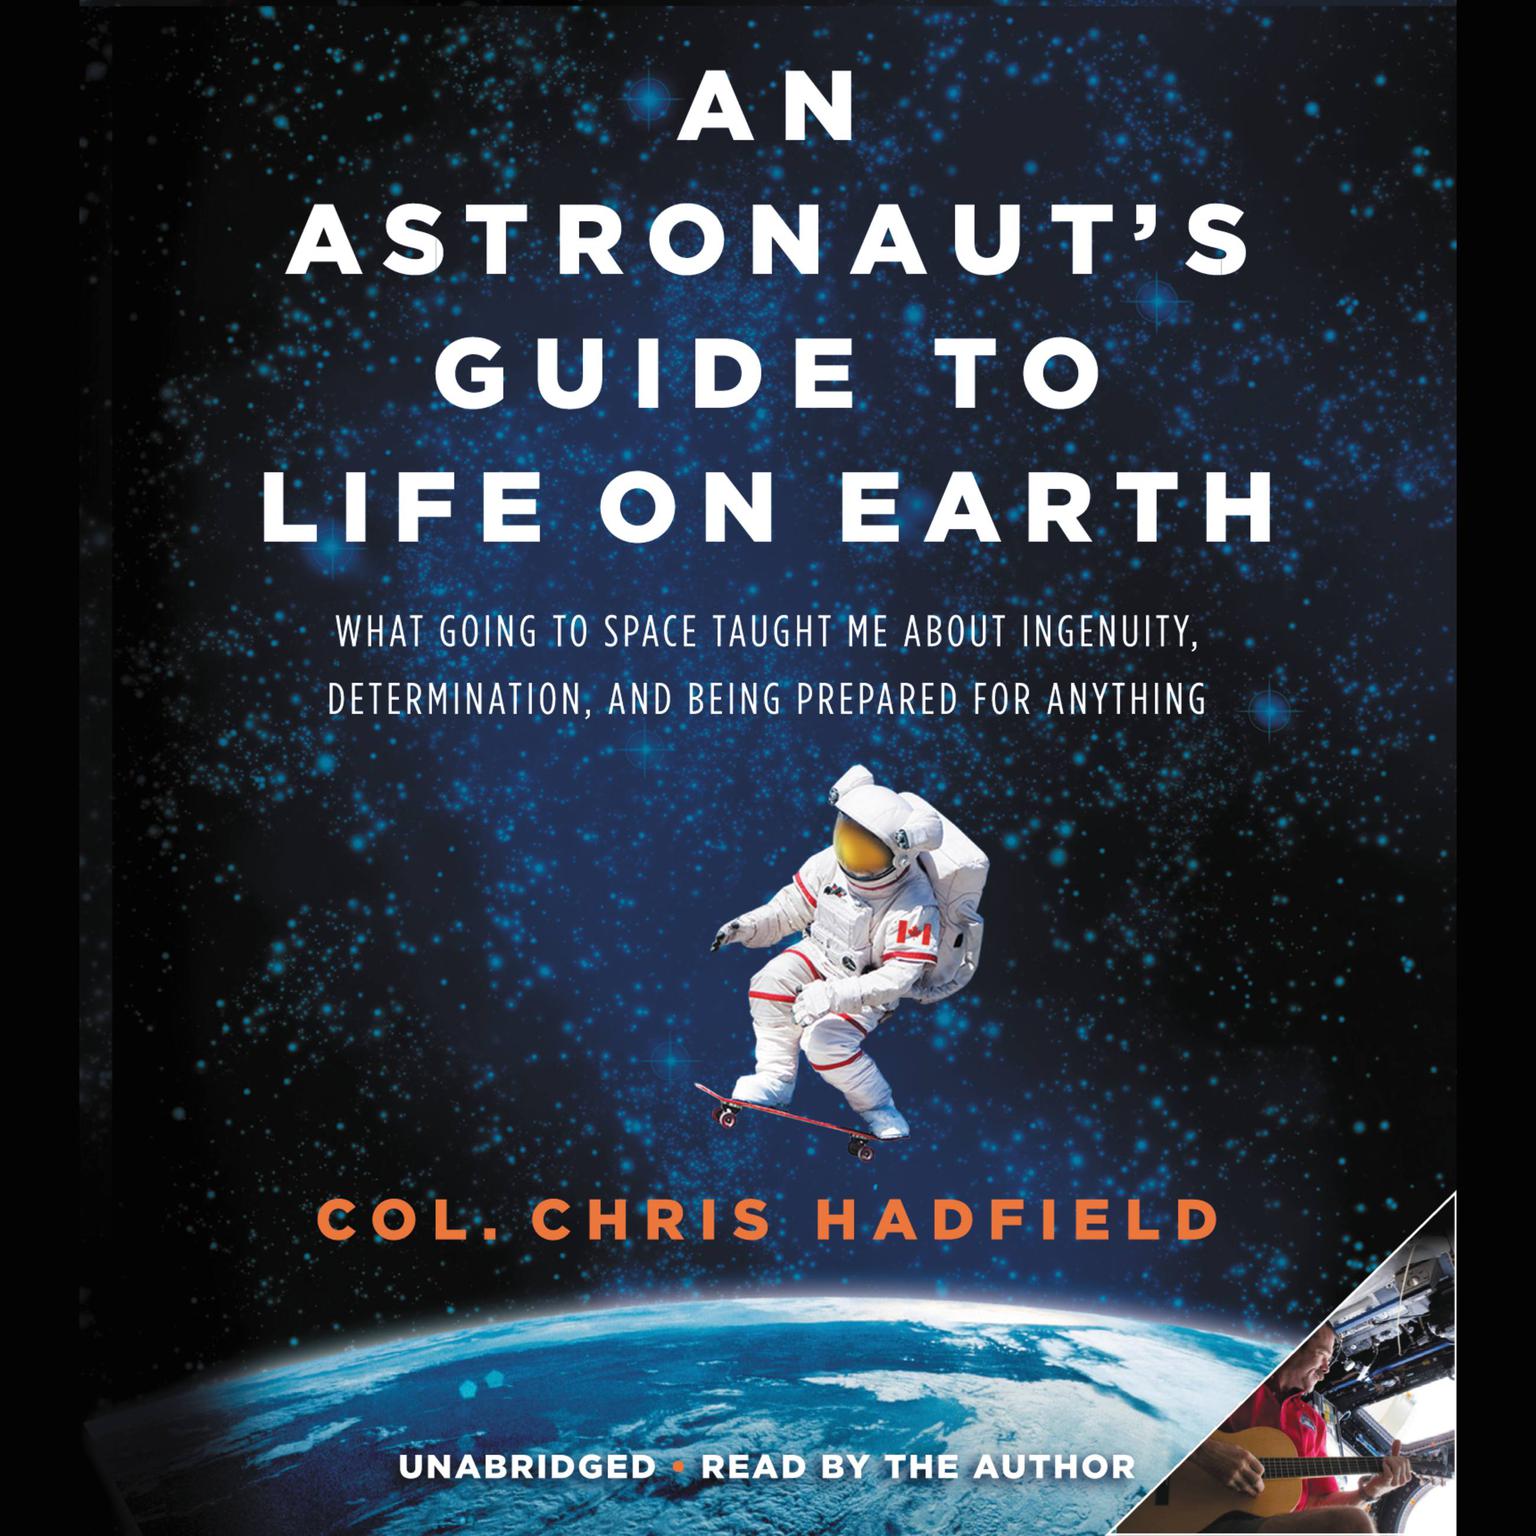 An Astronauts Guide to Life on Earth: What Going to Space Taught Me About Ingenuity, Determination, and Being Prepared for Anything Audiobook, by Chris Hadfield